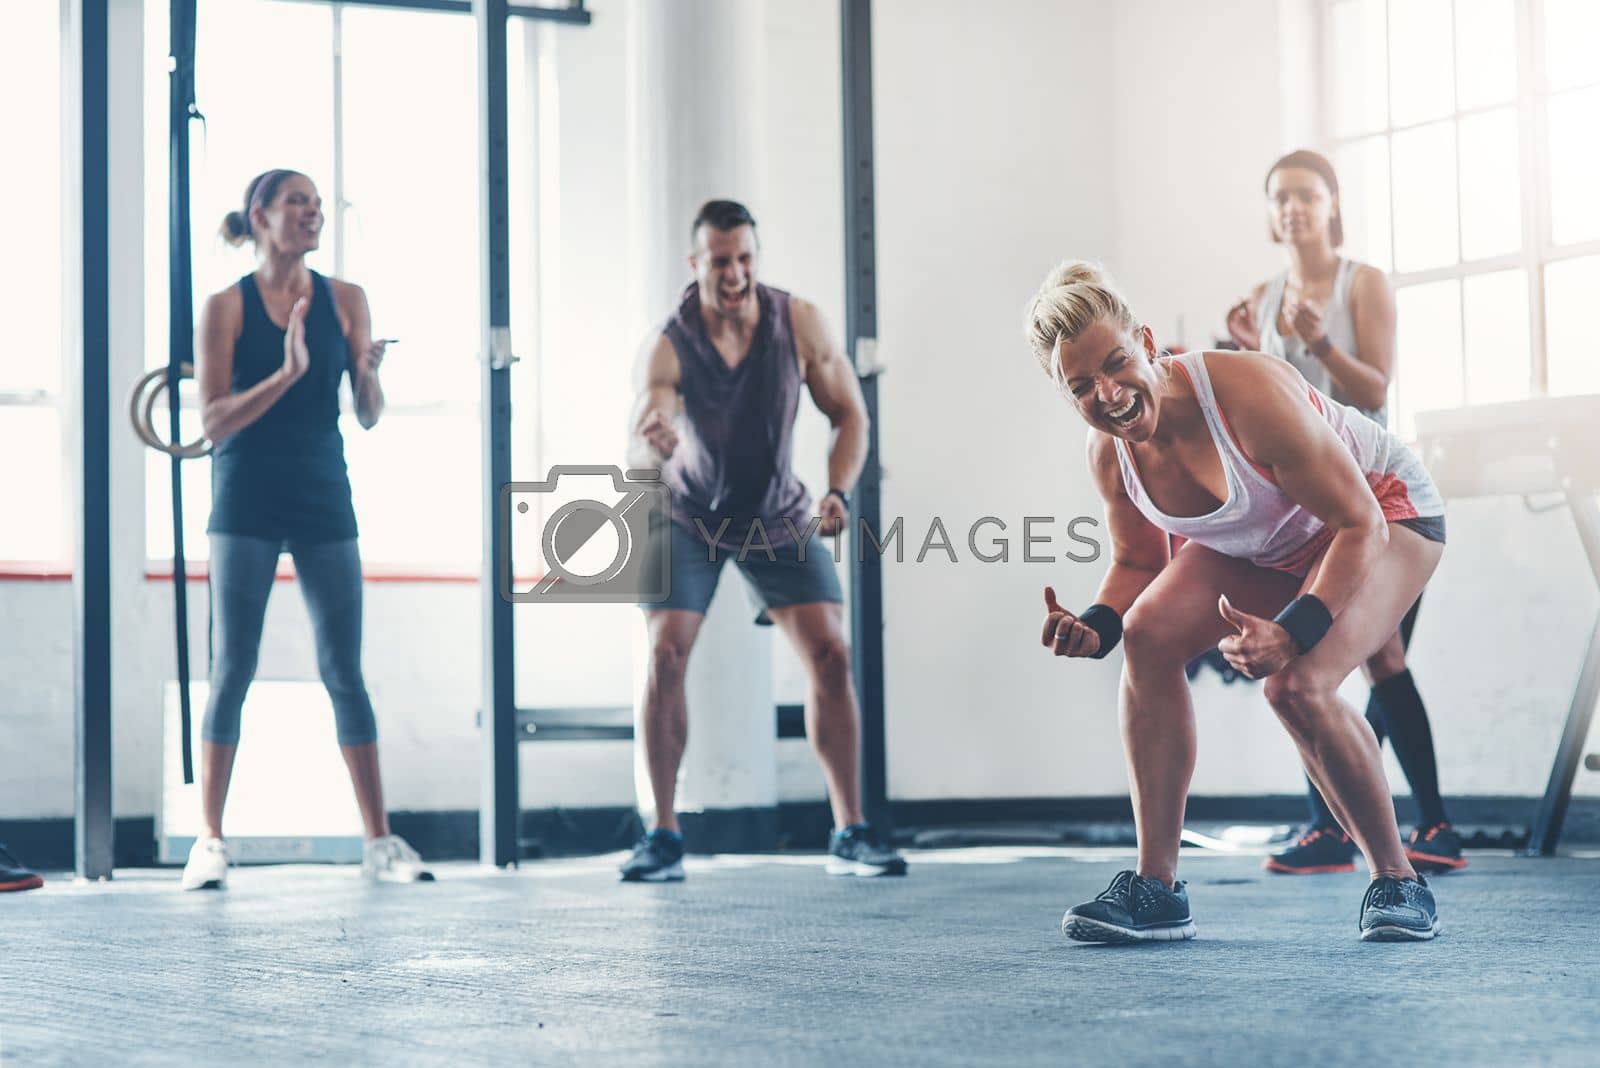 Royalty free image of Celebrate every victory. a fitness group celebrating a victory at the gym. by YuriArcurs